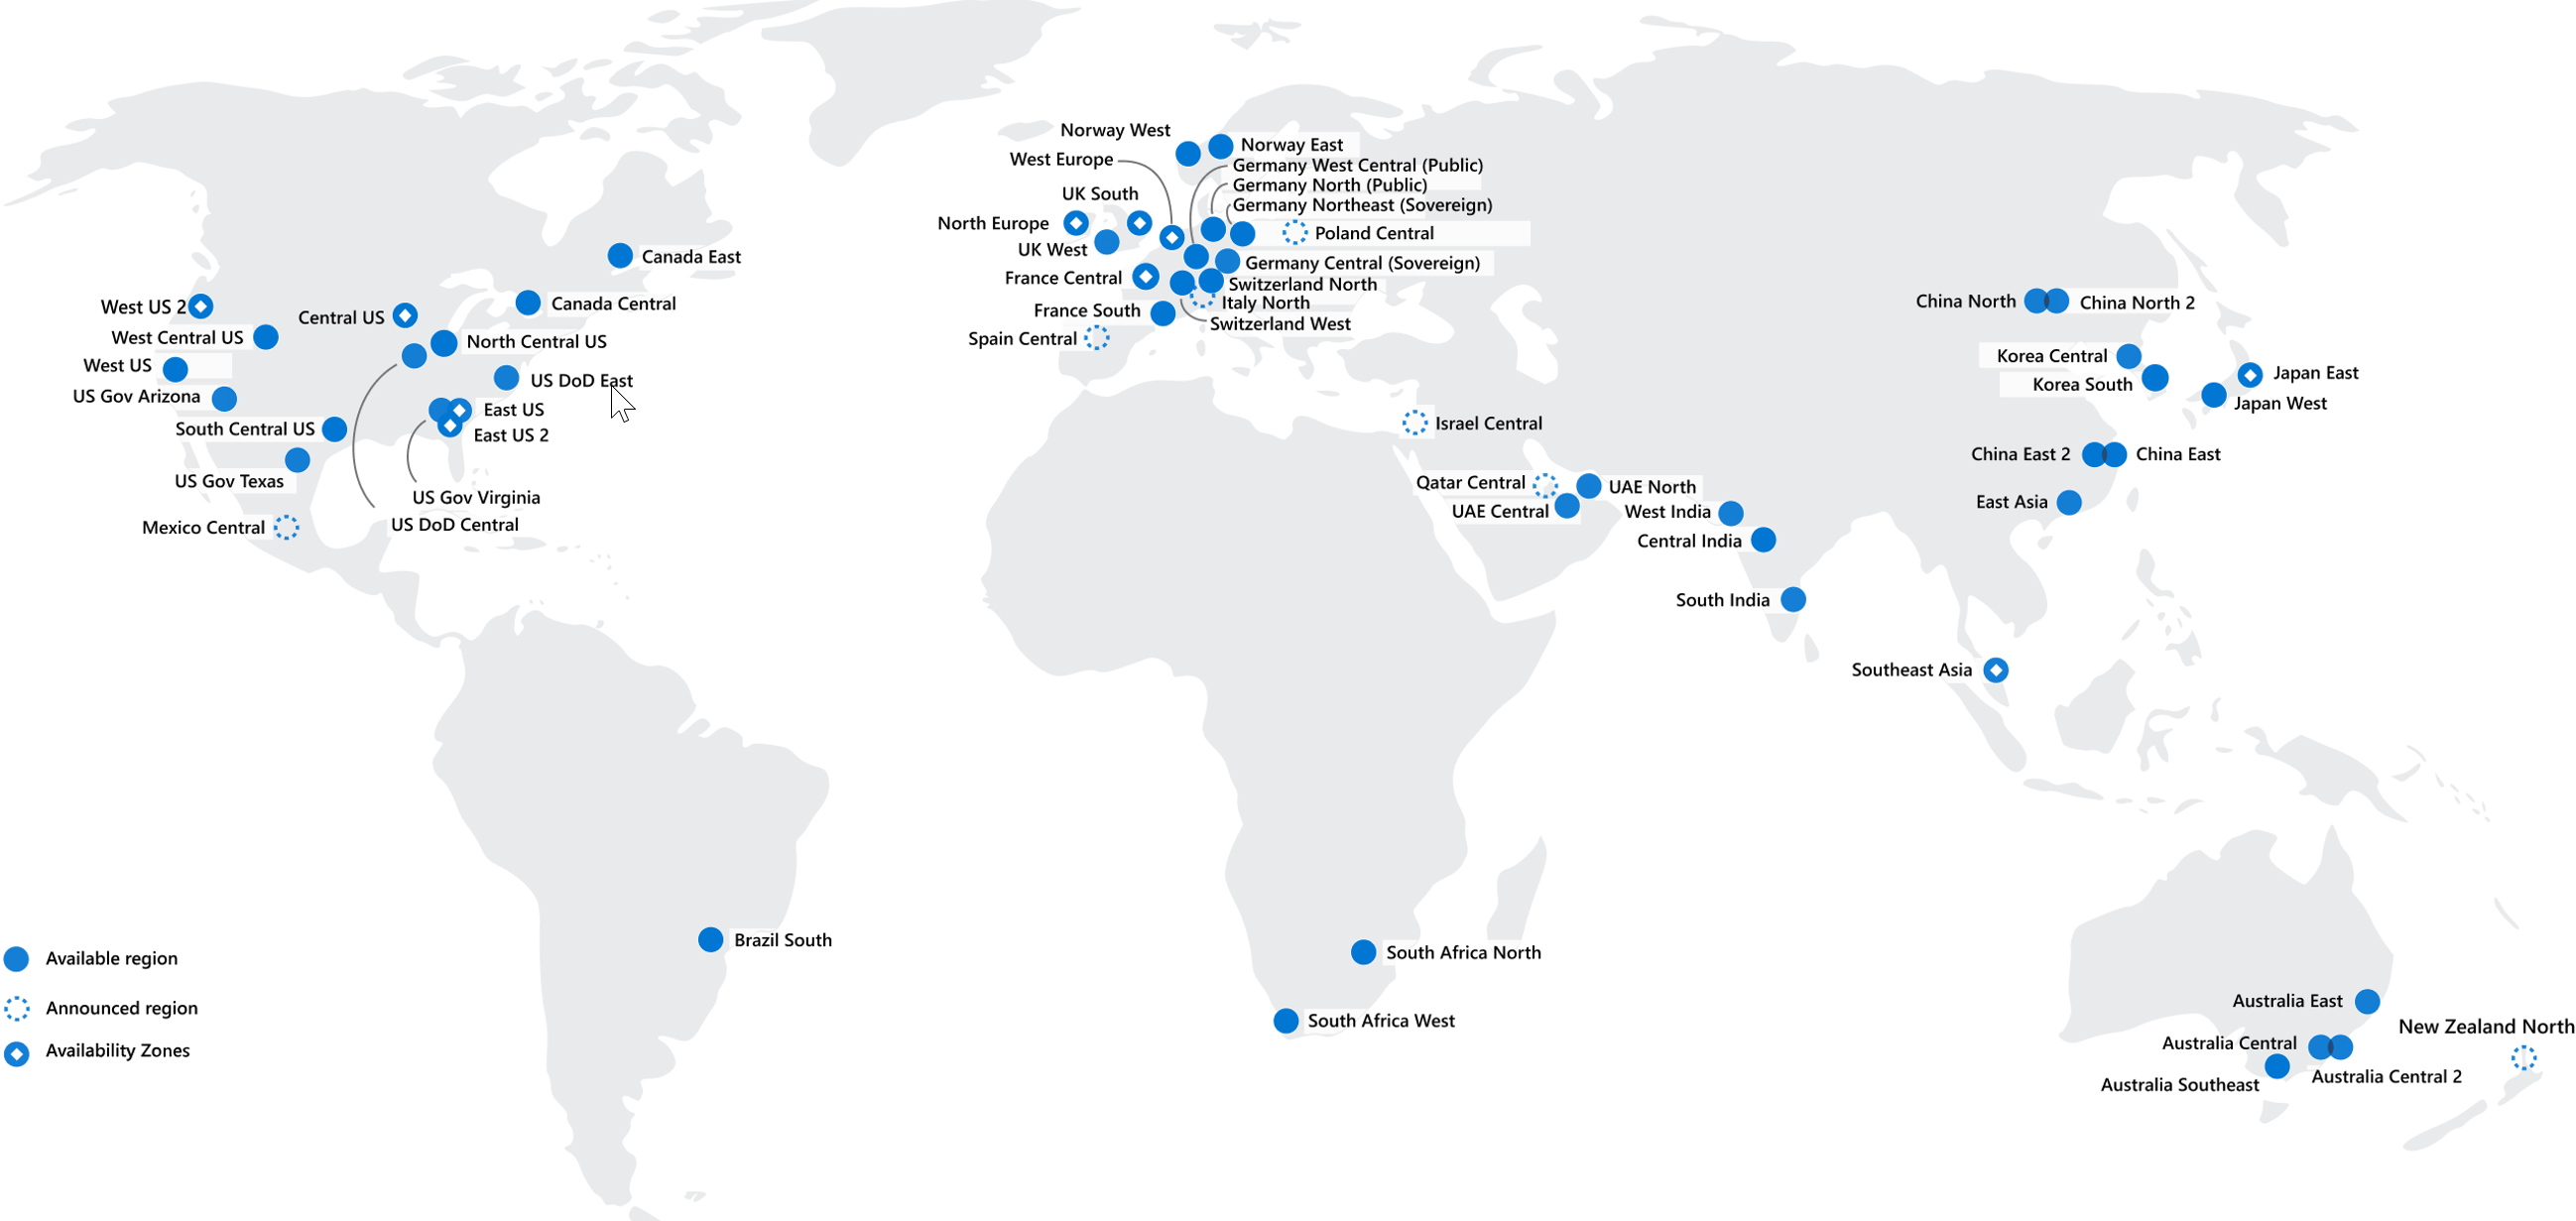 Global map of available Azure regions as of June 2020.